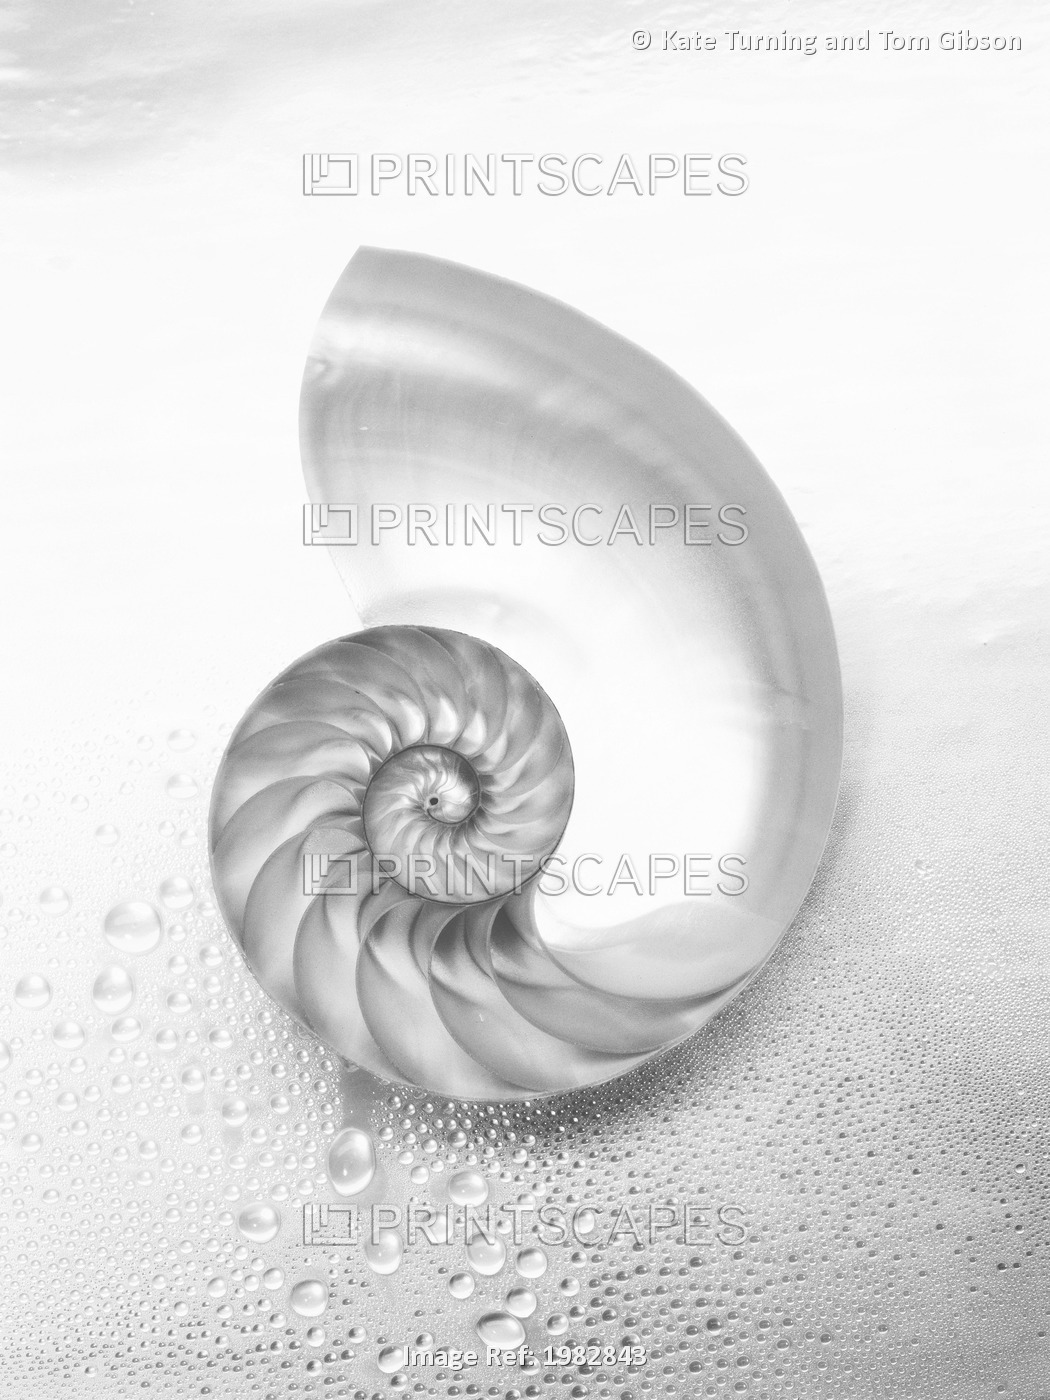 Pearl Nautilus Shell Cut In Half Showing Chambers (Black And White Photograph).